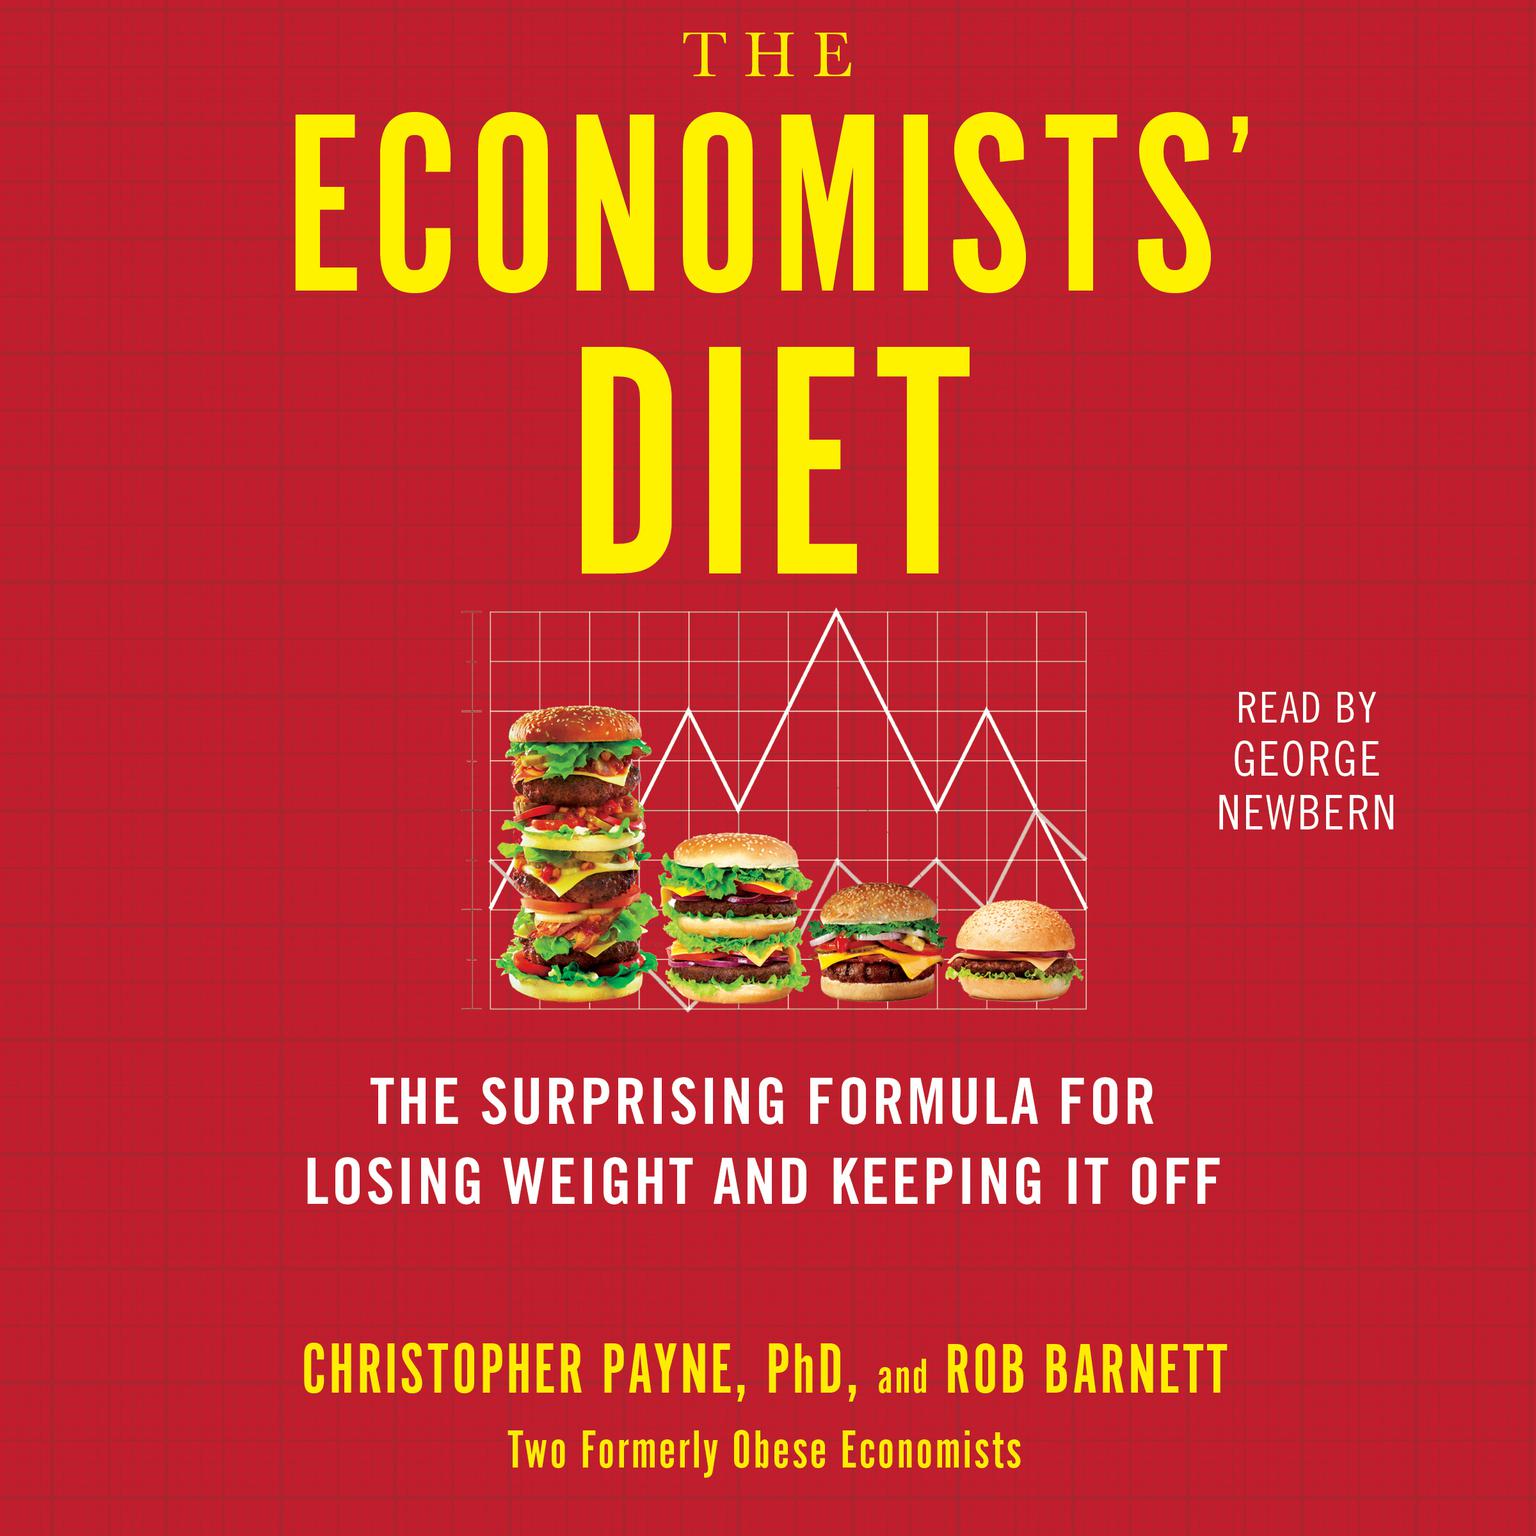 The Economists Diet: Two Formerly Obese Economists Find the Formula for Losing Weight and Keeping It Off Audiobook, by Christopher Payne